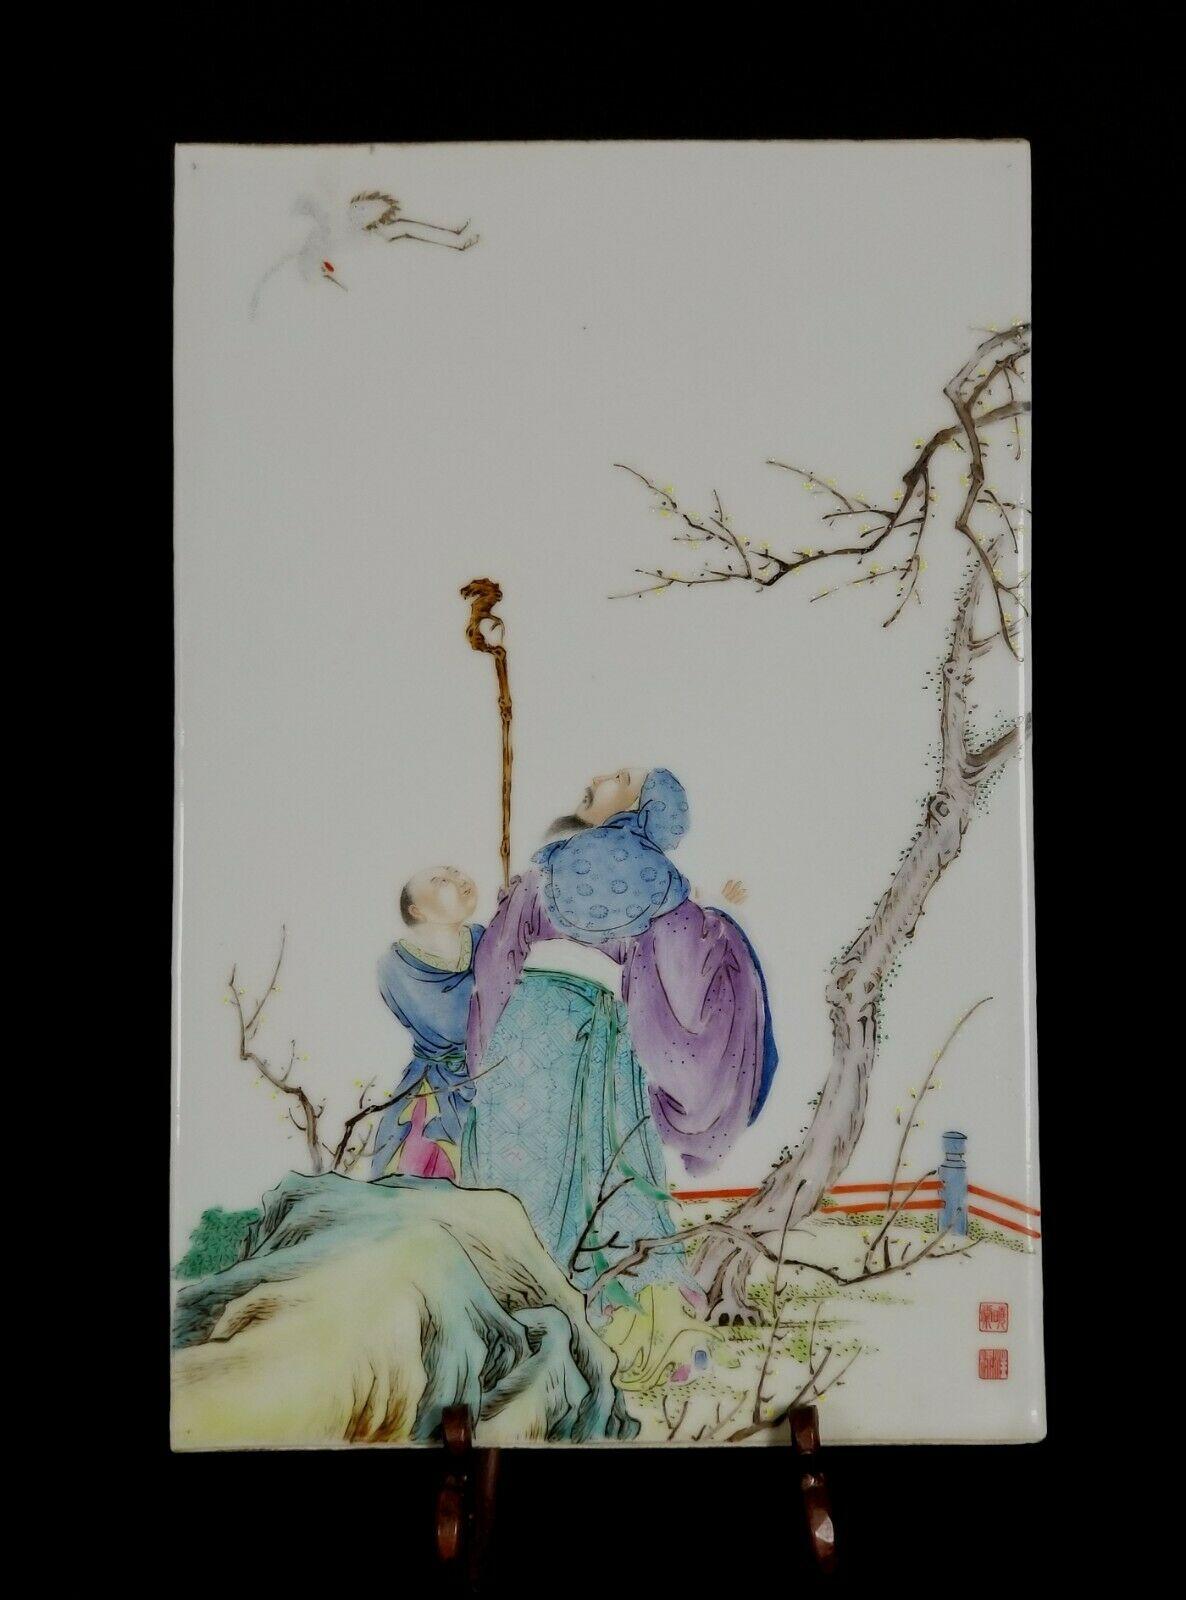 A Chinese Famille rose 
Porcelain plaque 
Early 20th century

Signed Chinese Famille rose porcelain plaque of two men watching a crane in flight. Two seals at lower right. Nicely detailed and in excellent condition with no chips, cracks, or